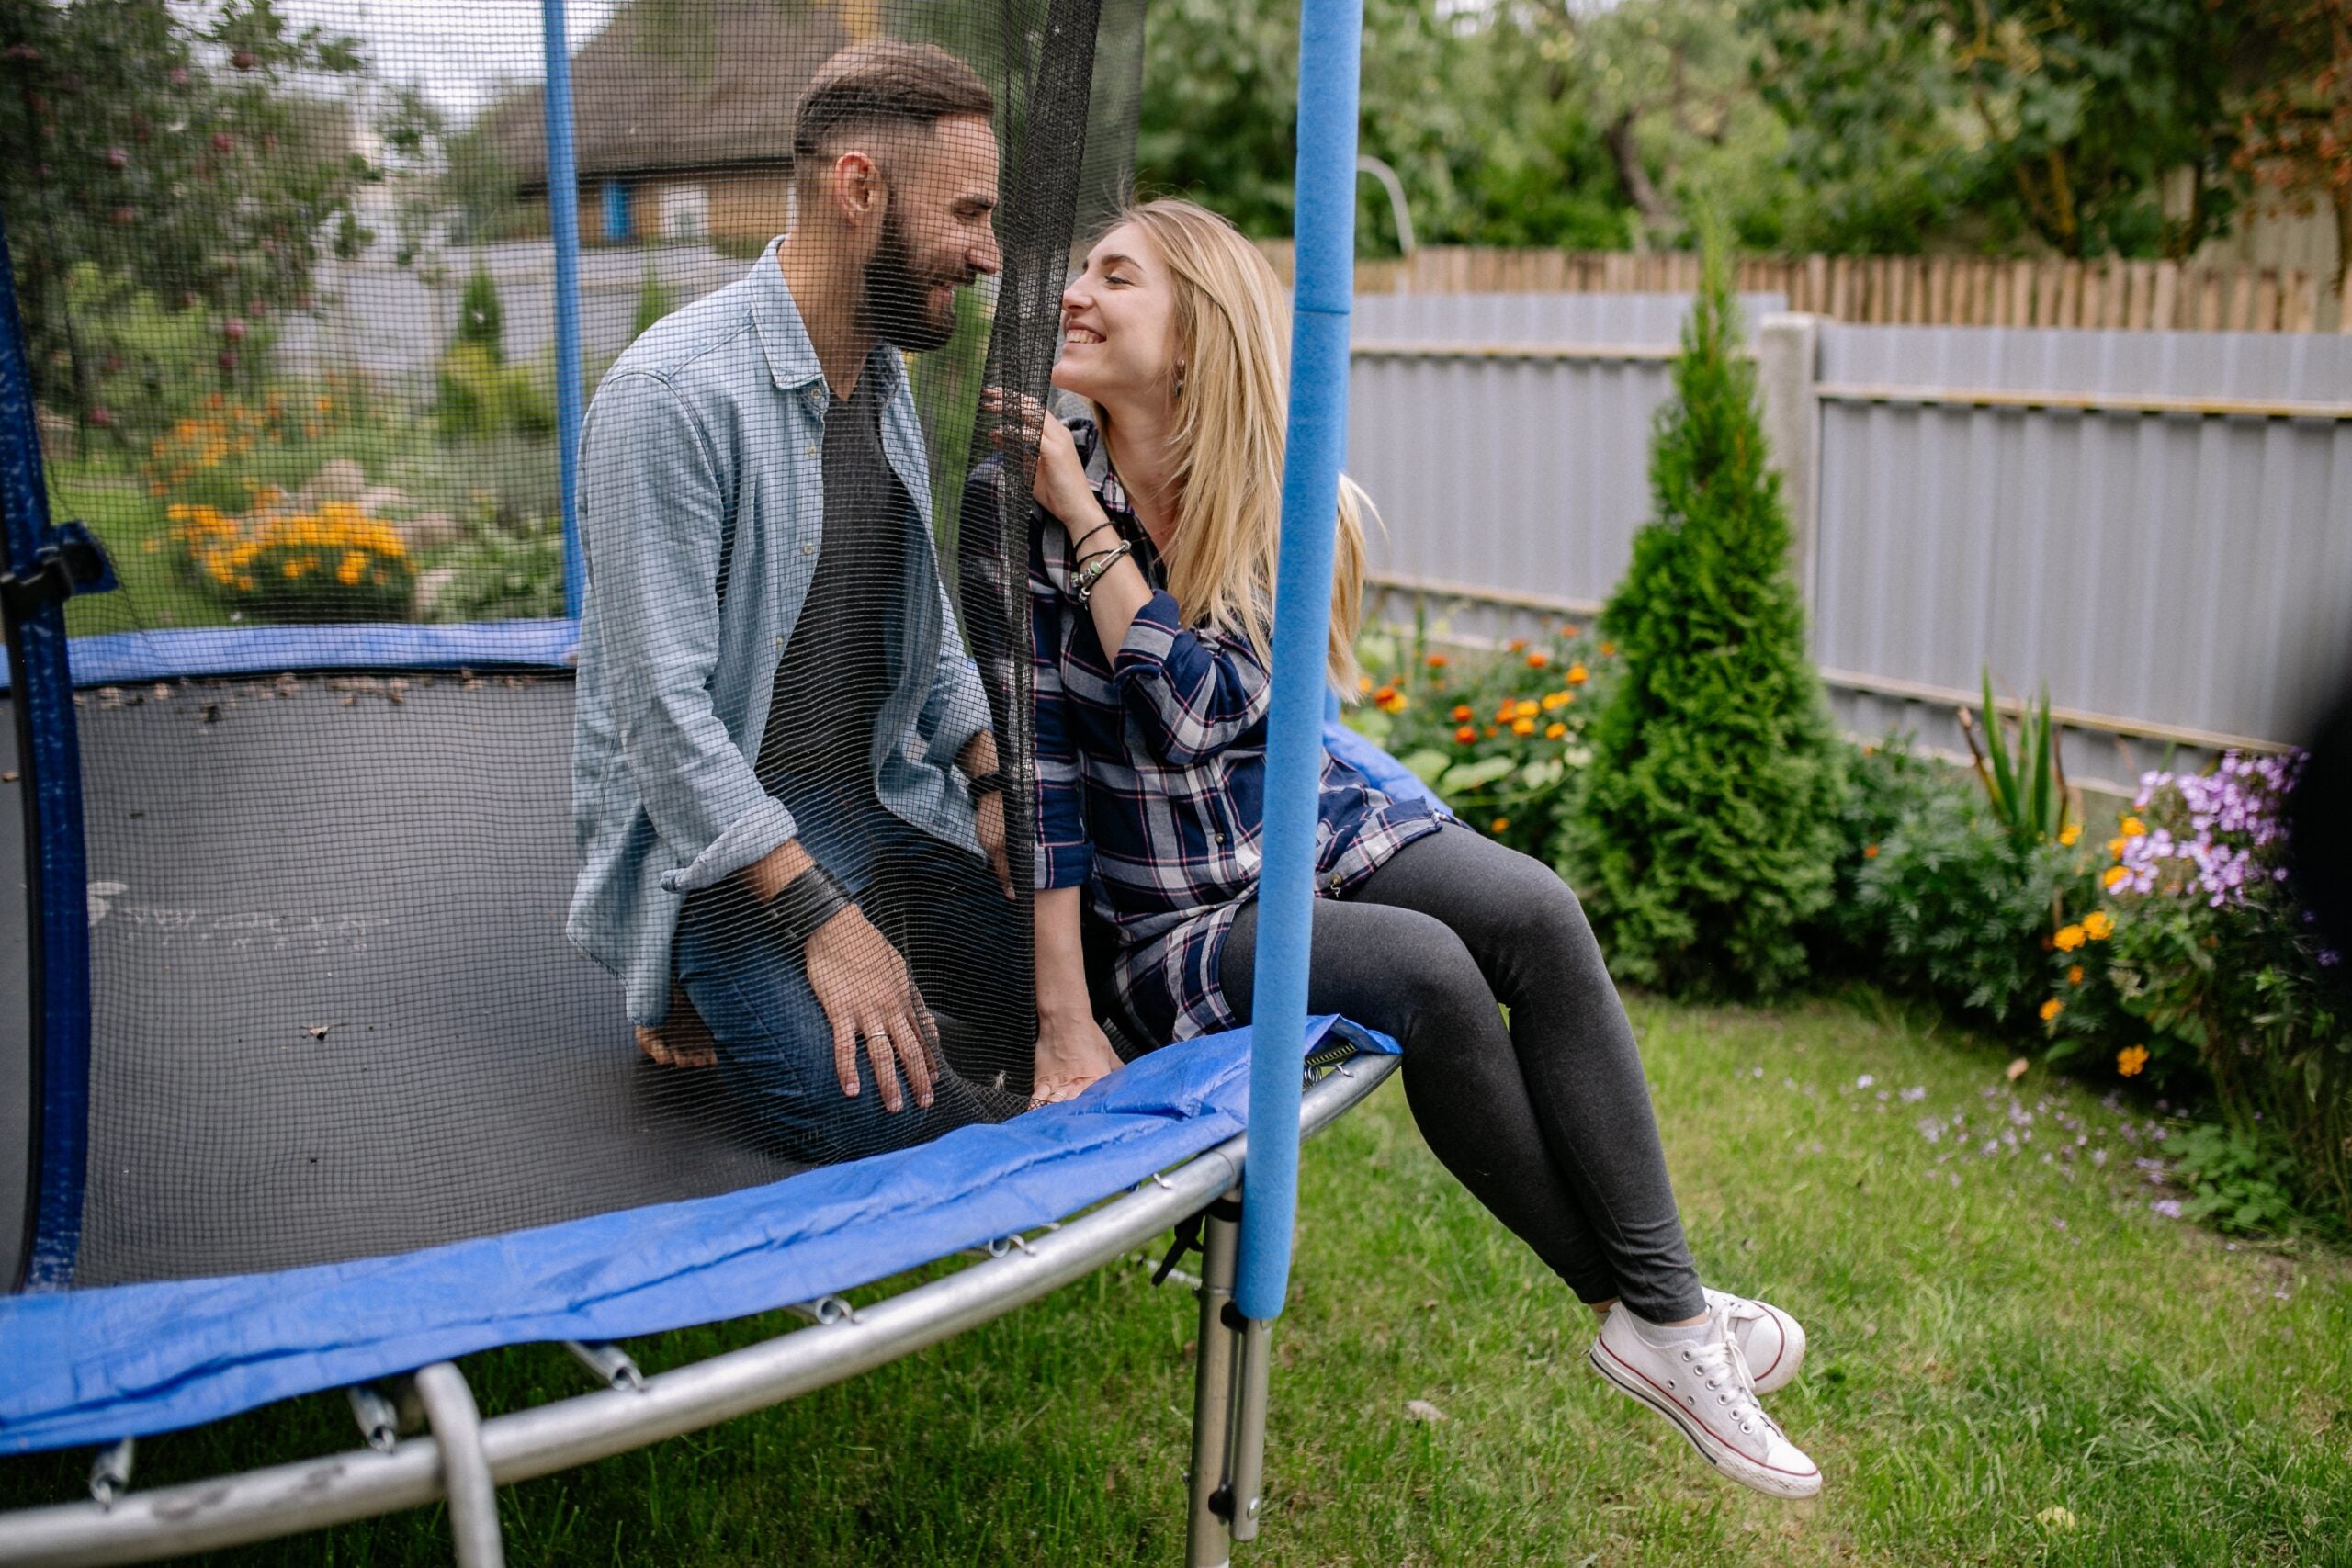 Five Questions To Ask Before You Buy A Trampoline